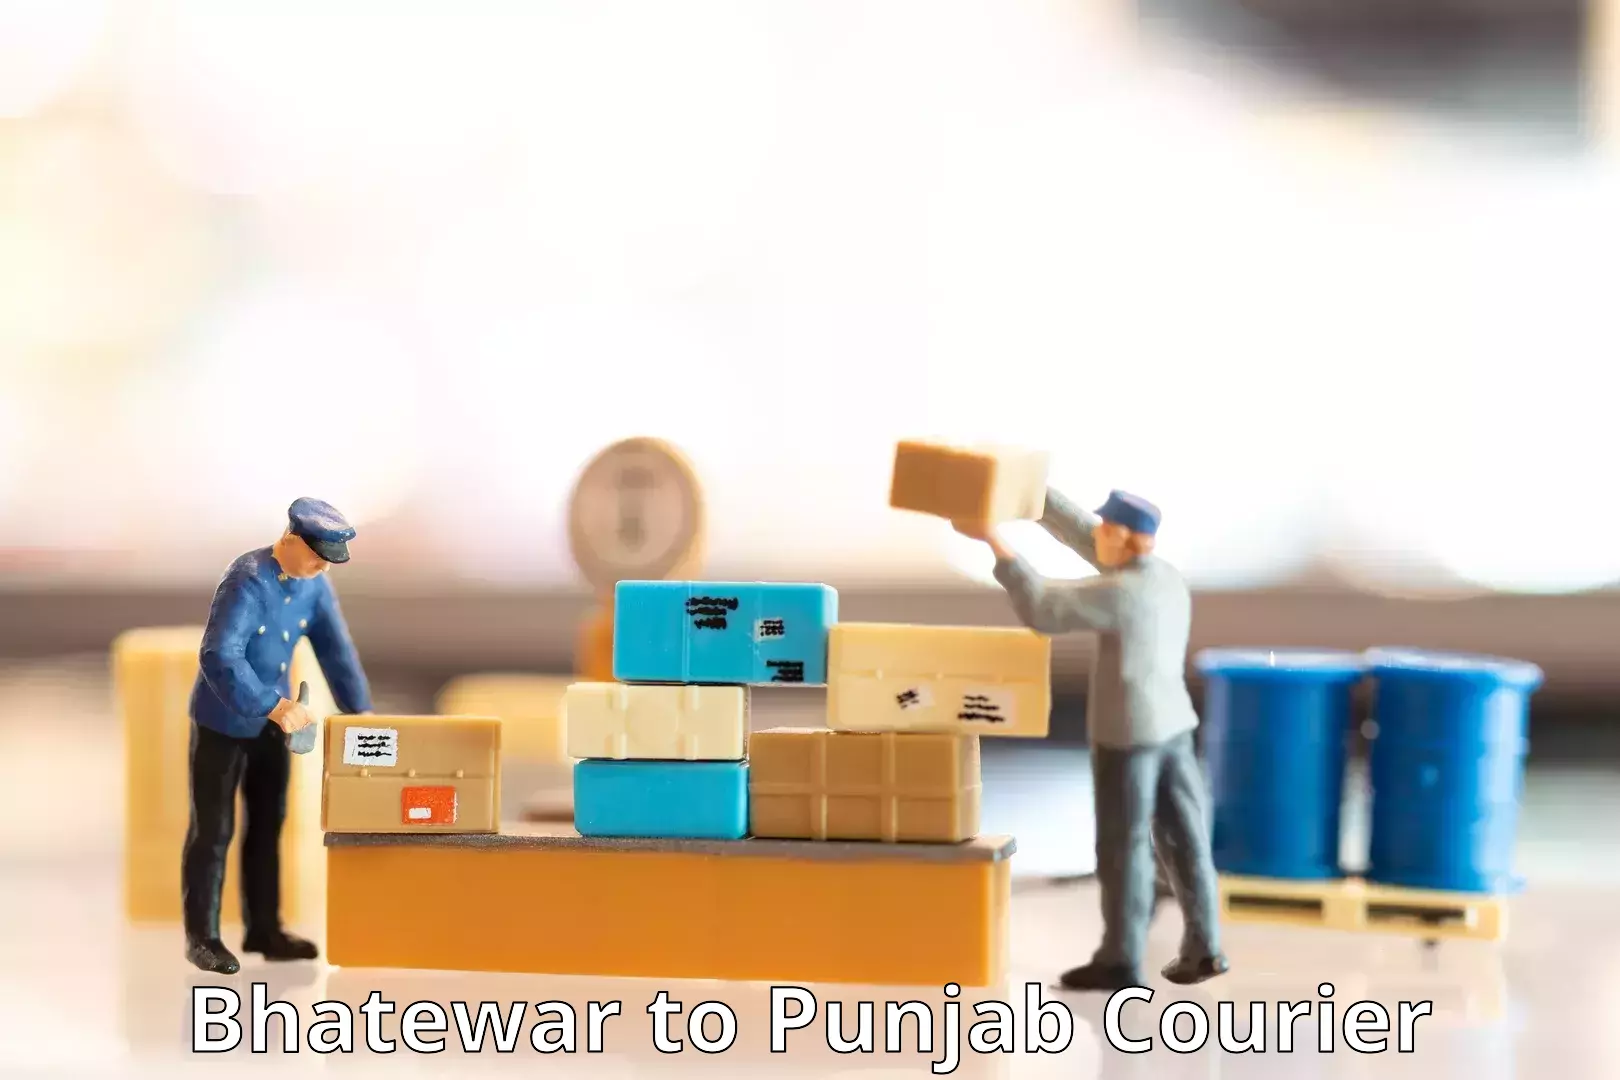 Easy access courier services Bhatewar to Central University of Punjab Bathinda